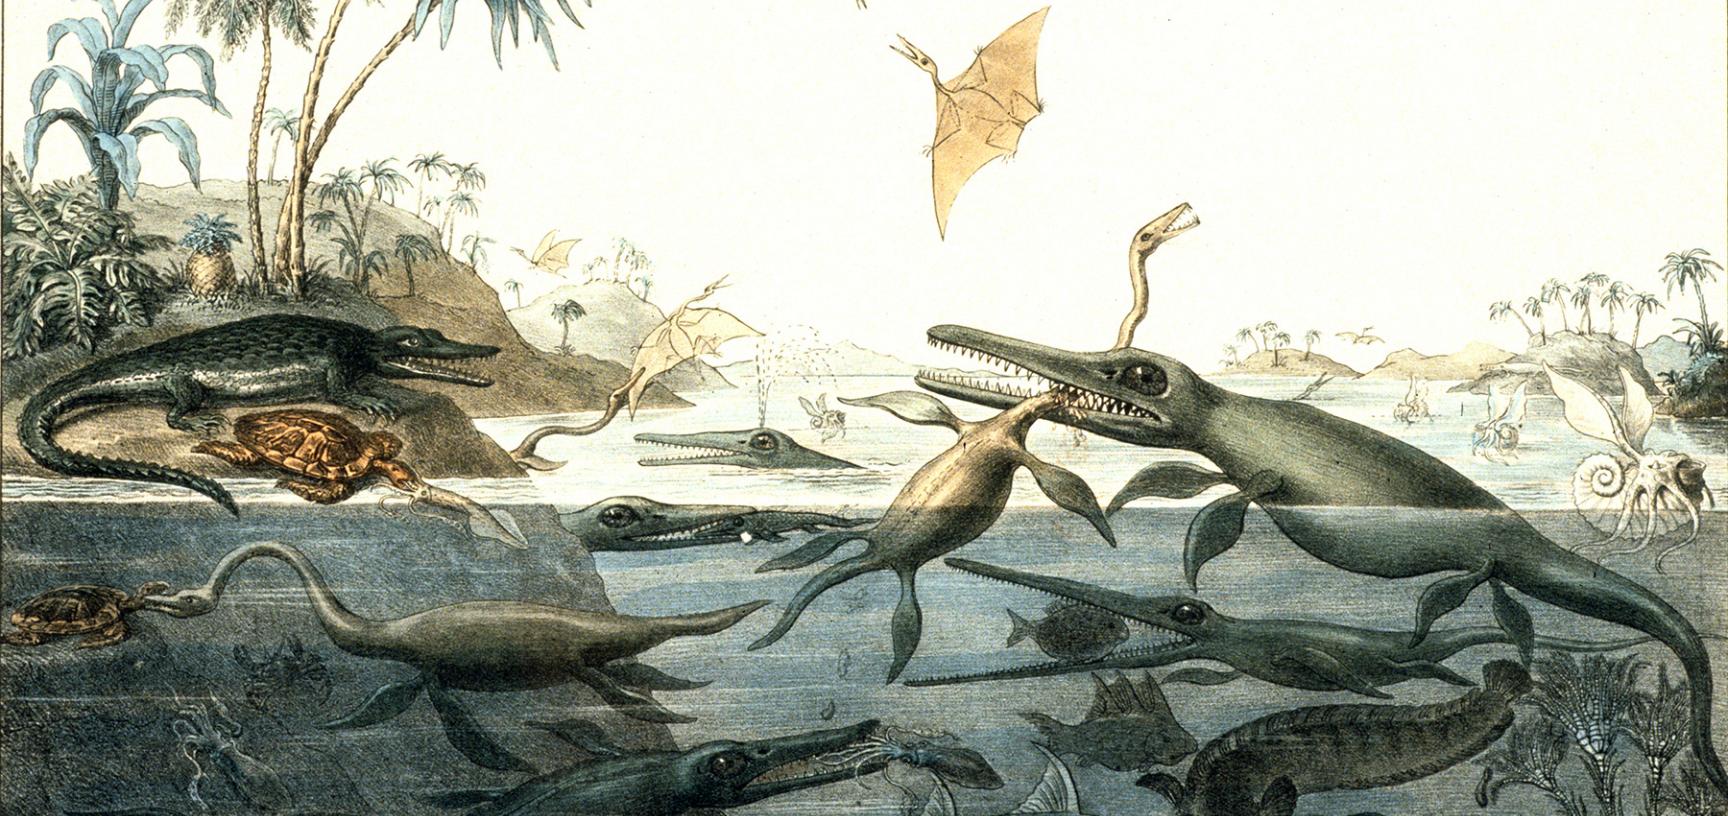 <i>Duria Antiquior - A more Ancient Dorset</i> painted by Henry De la Beche in 1830, is the first artistic representation of a scene of prehistoric life based on evidence from fossil remains, today known as ‘palaeoart’.